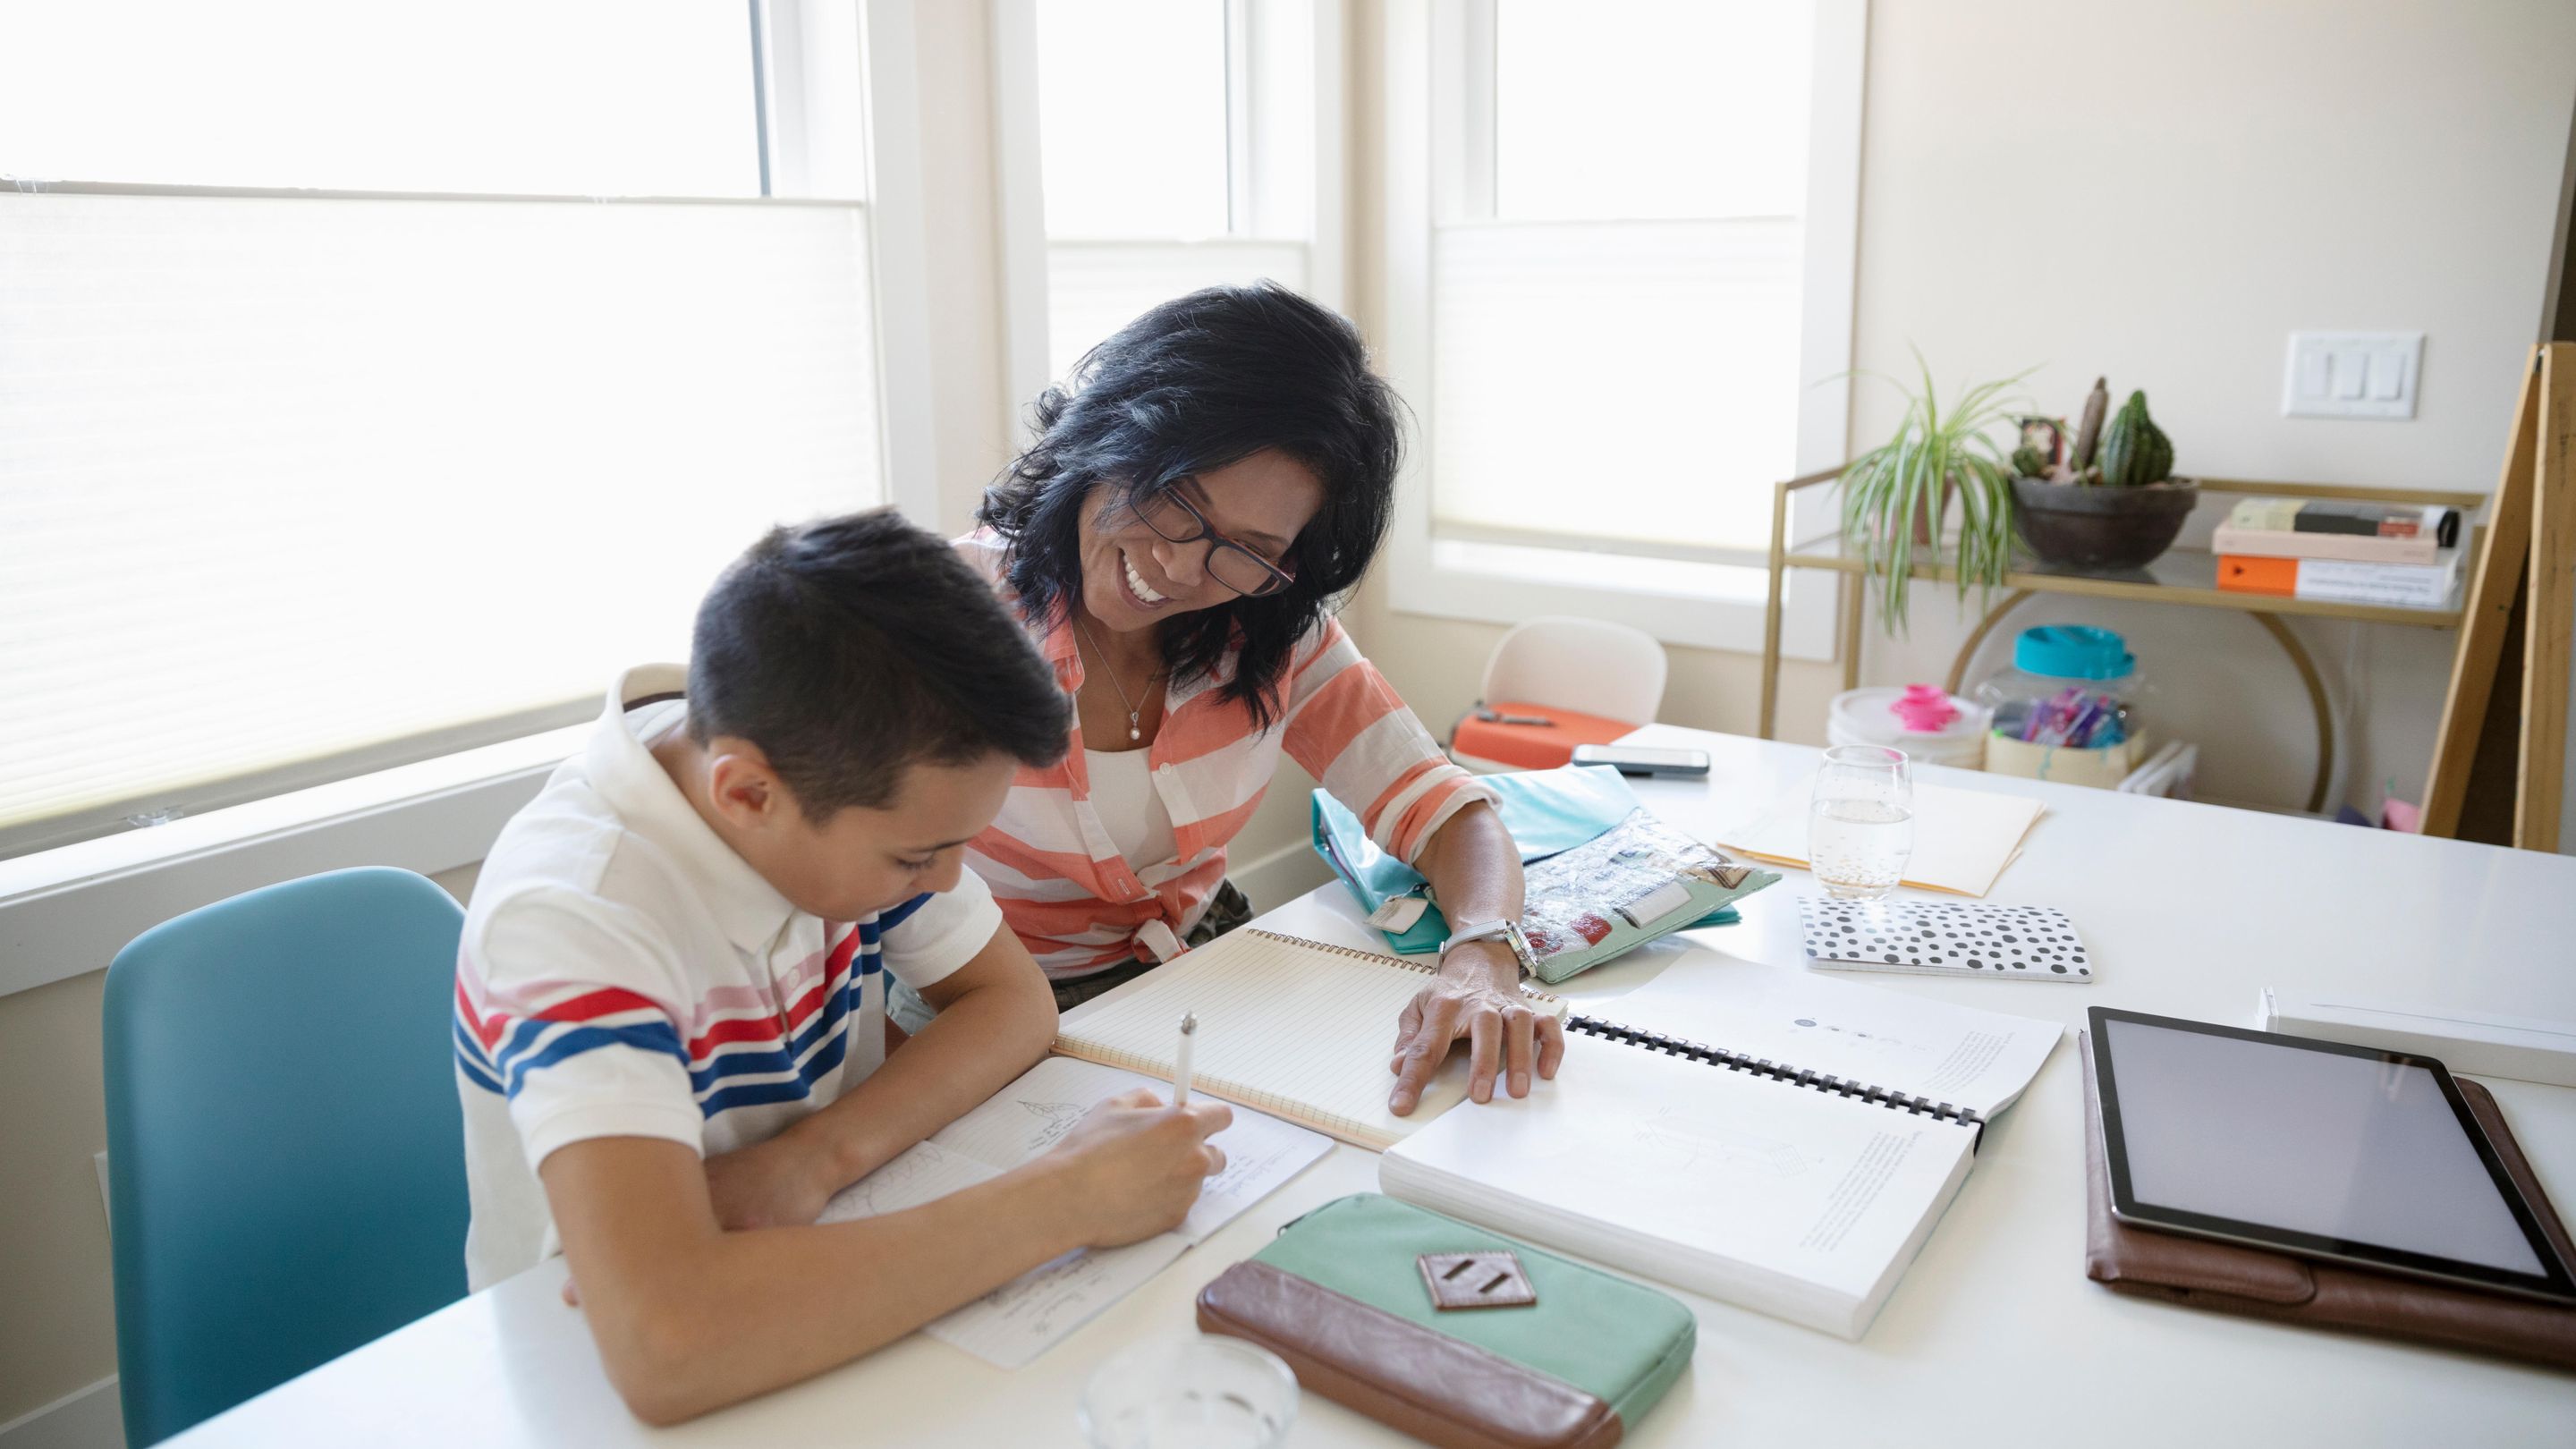 How Parents Can Help Their Kids With Studying | Edutopia